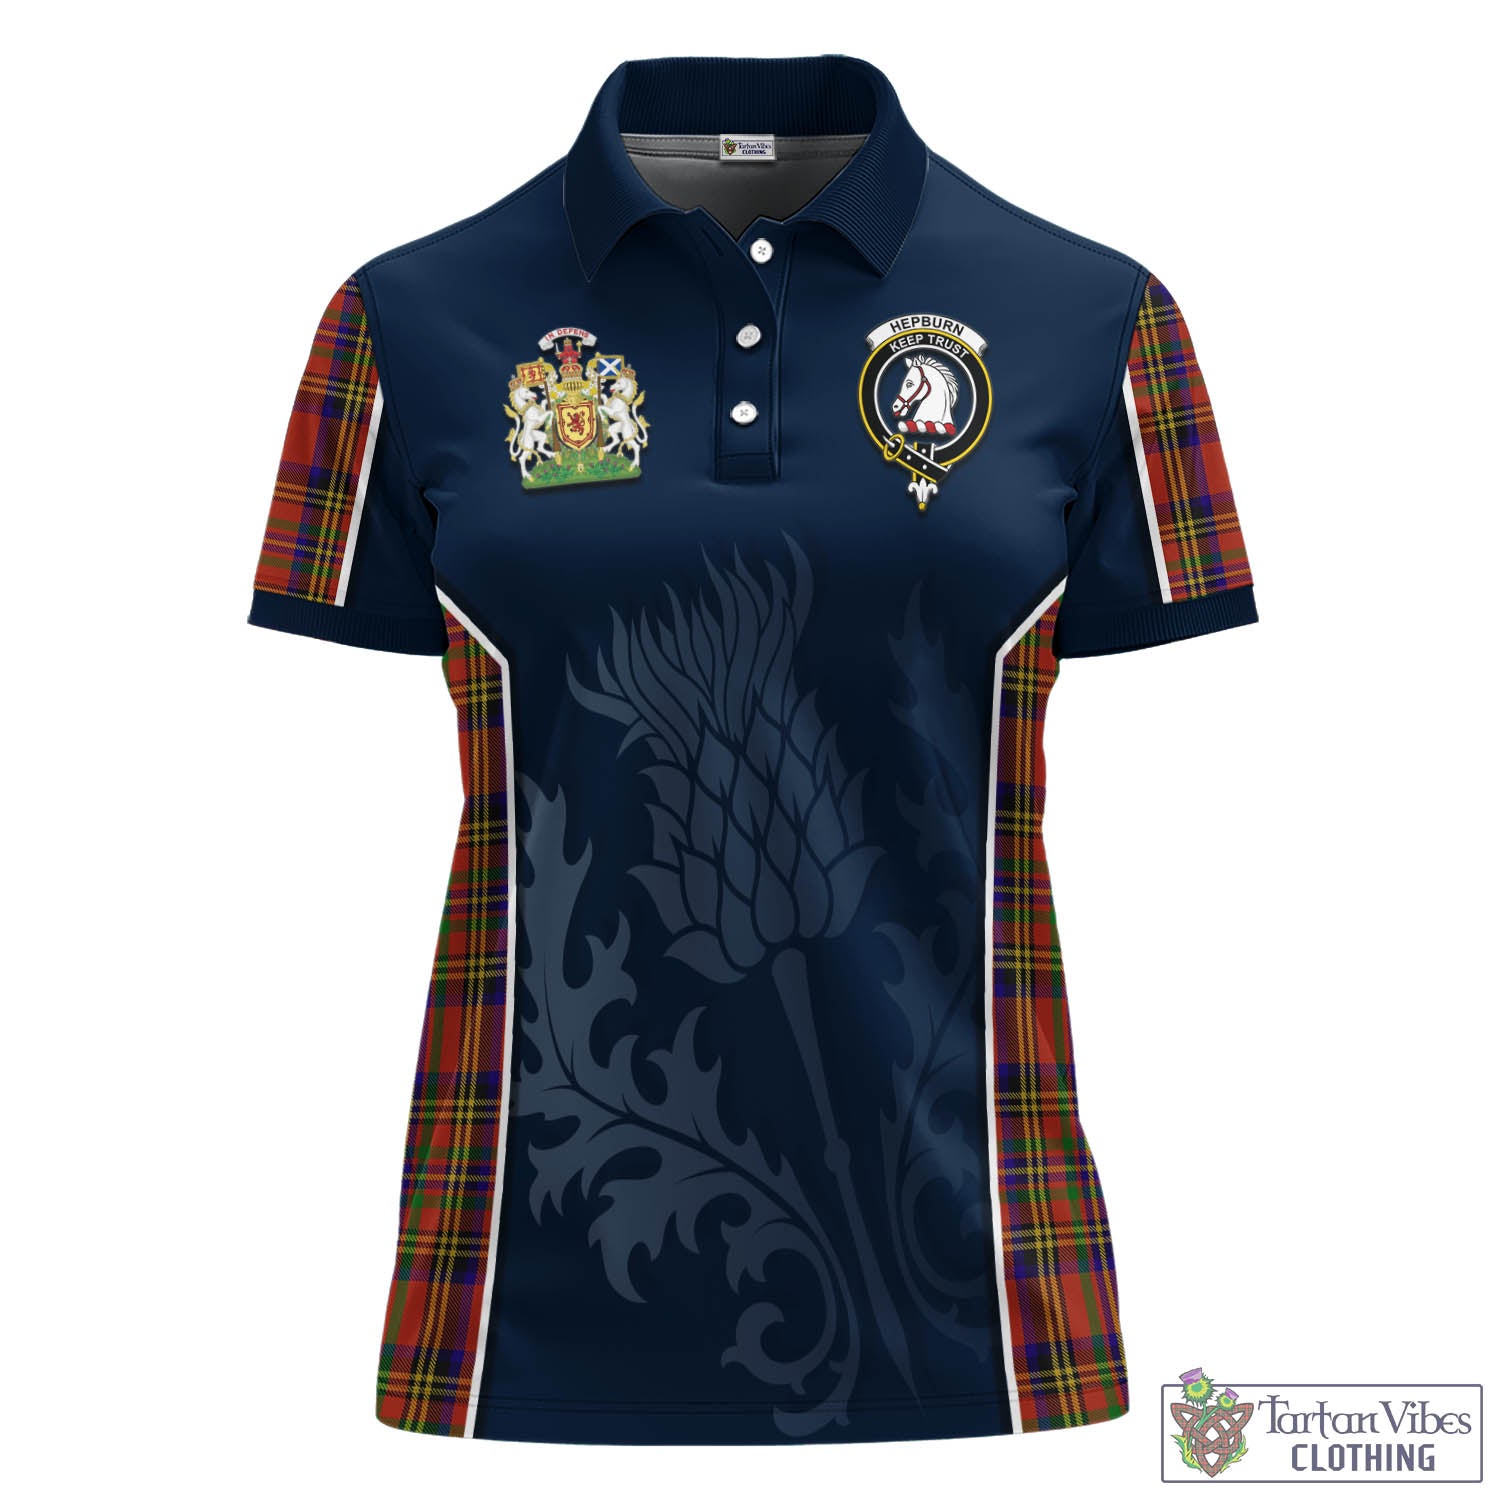 Tartan Vibes Clothing Hepburn Tartan Women's Polo Shirt with Family Crest and Scottish Thistle Vibes Sport Style